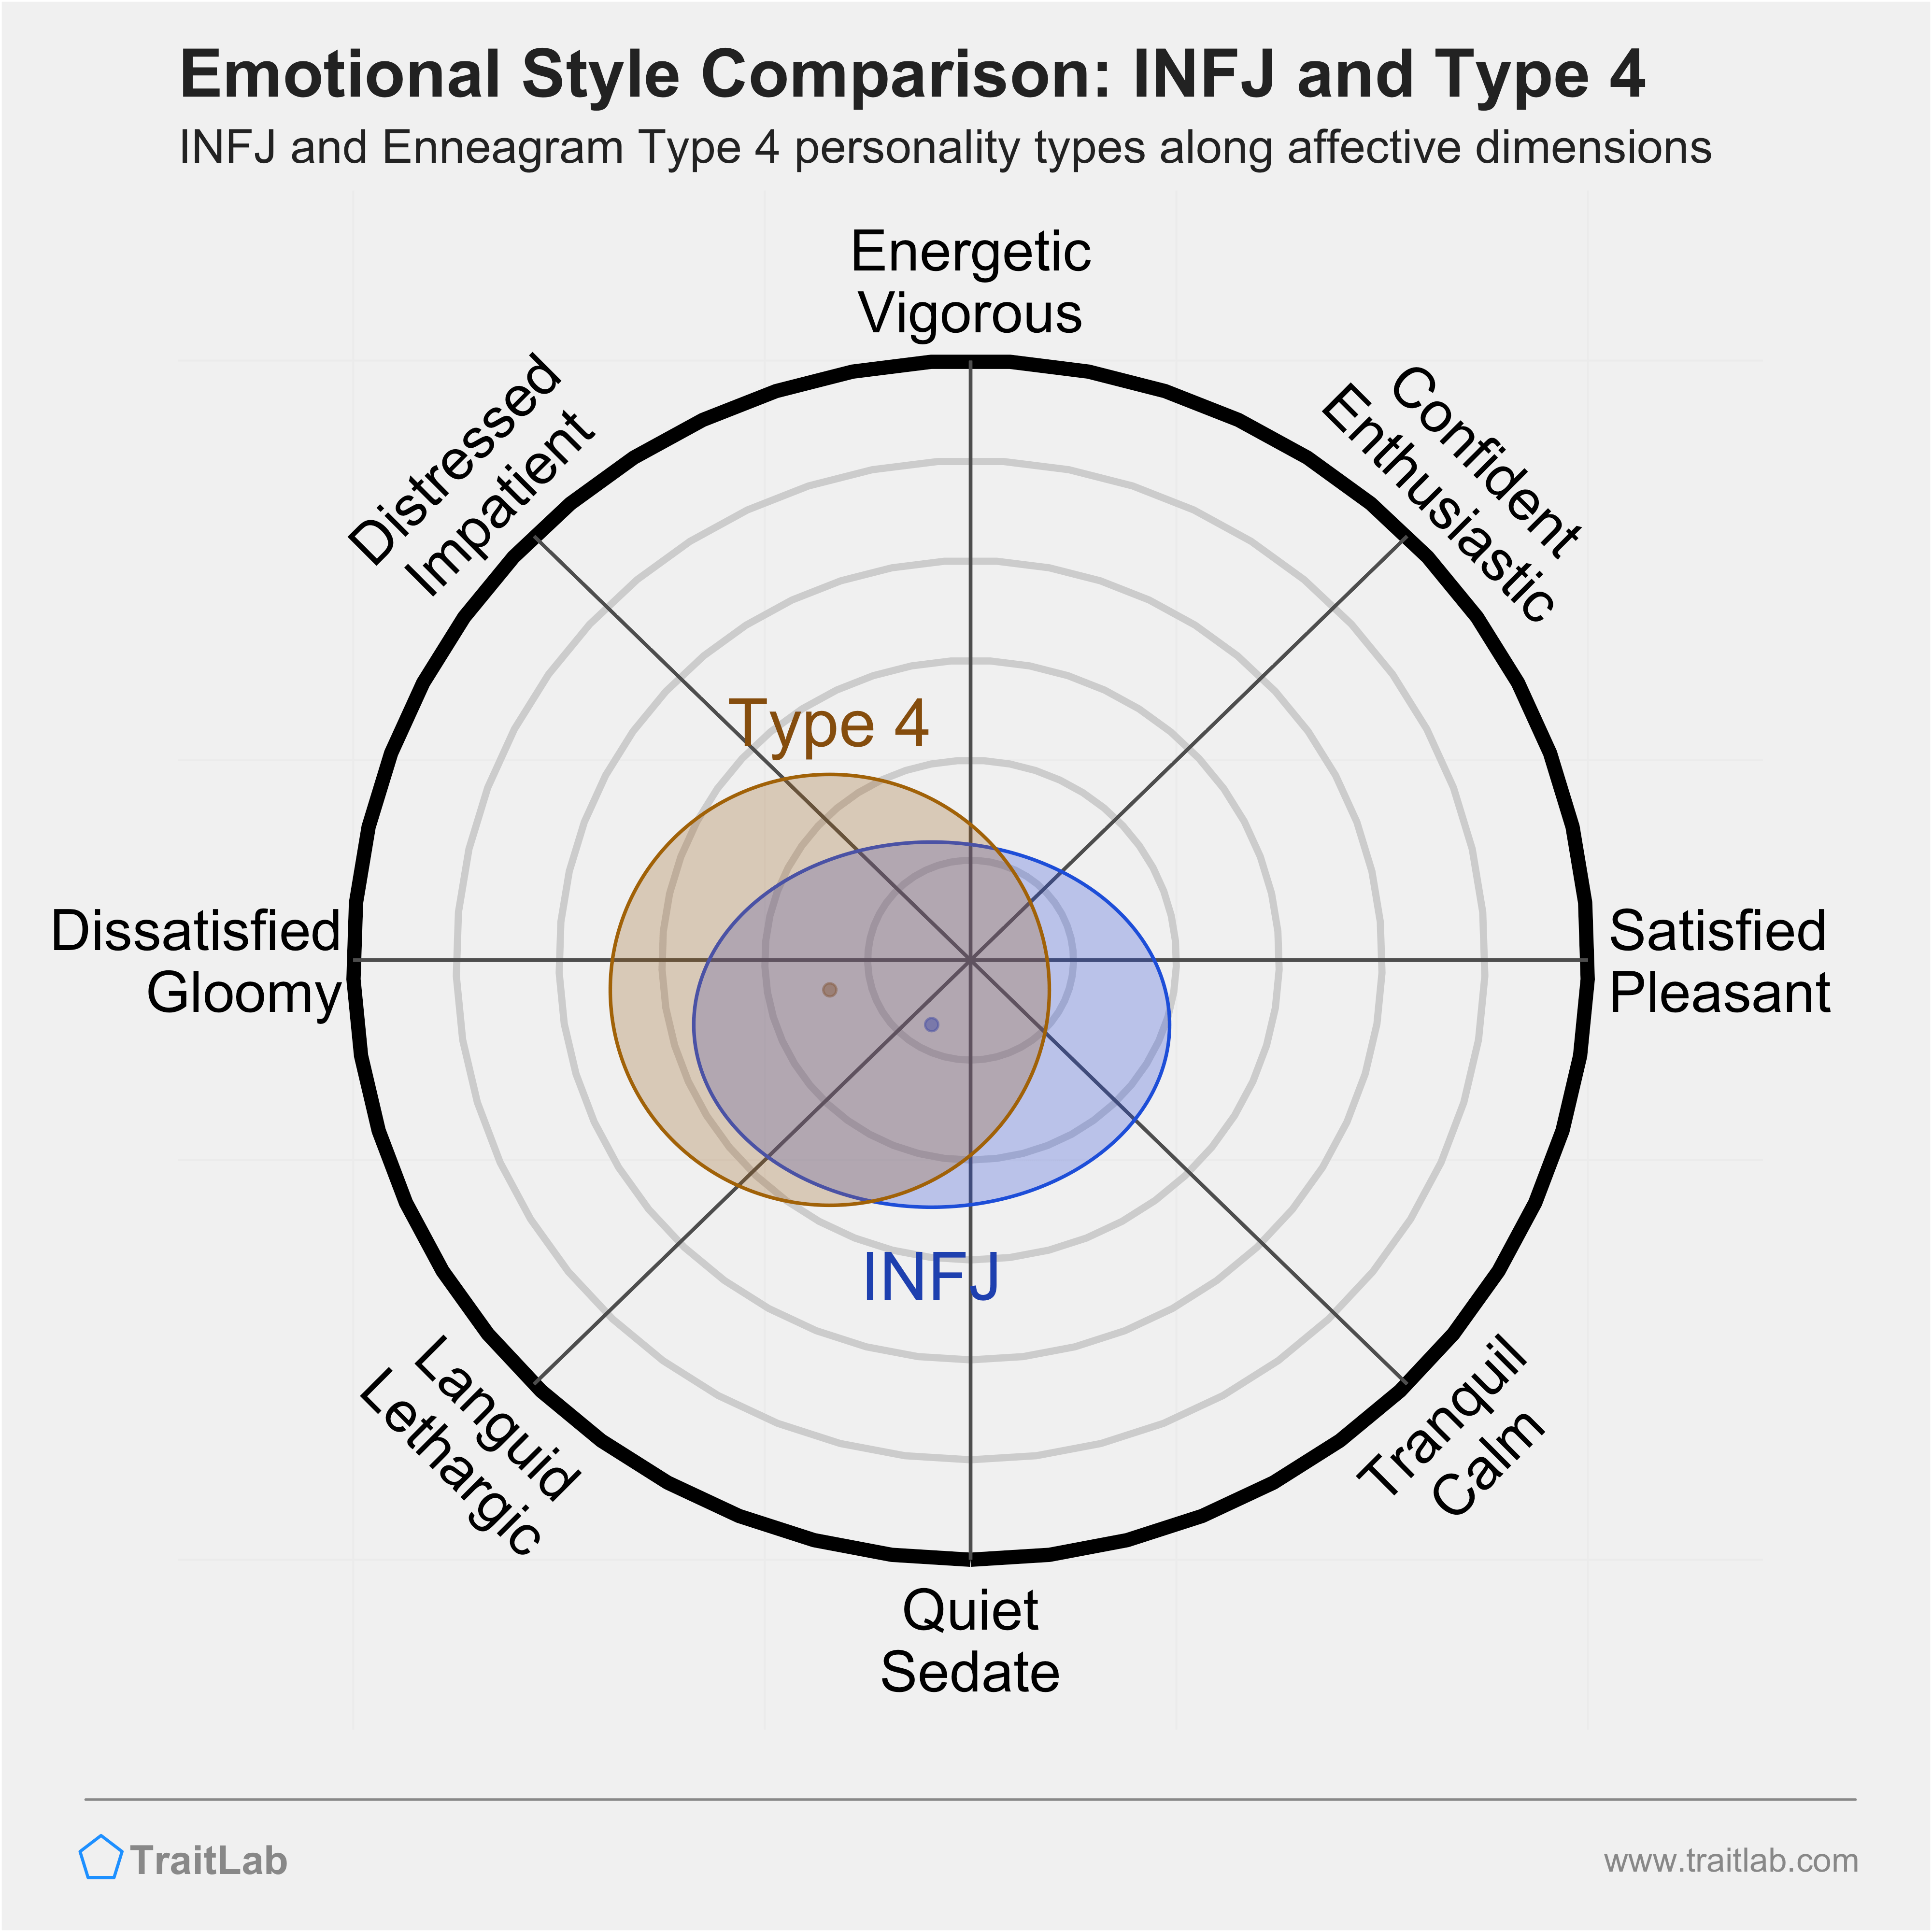 INFJ and Type 4 comparison across emotional (affective) dimensions